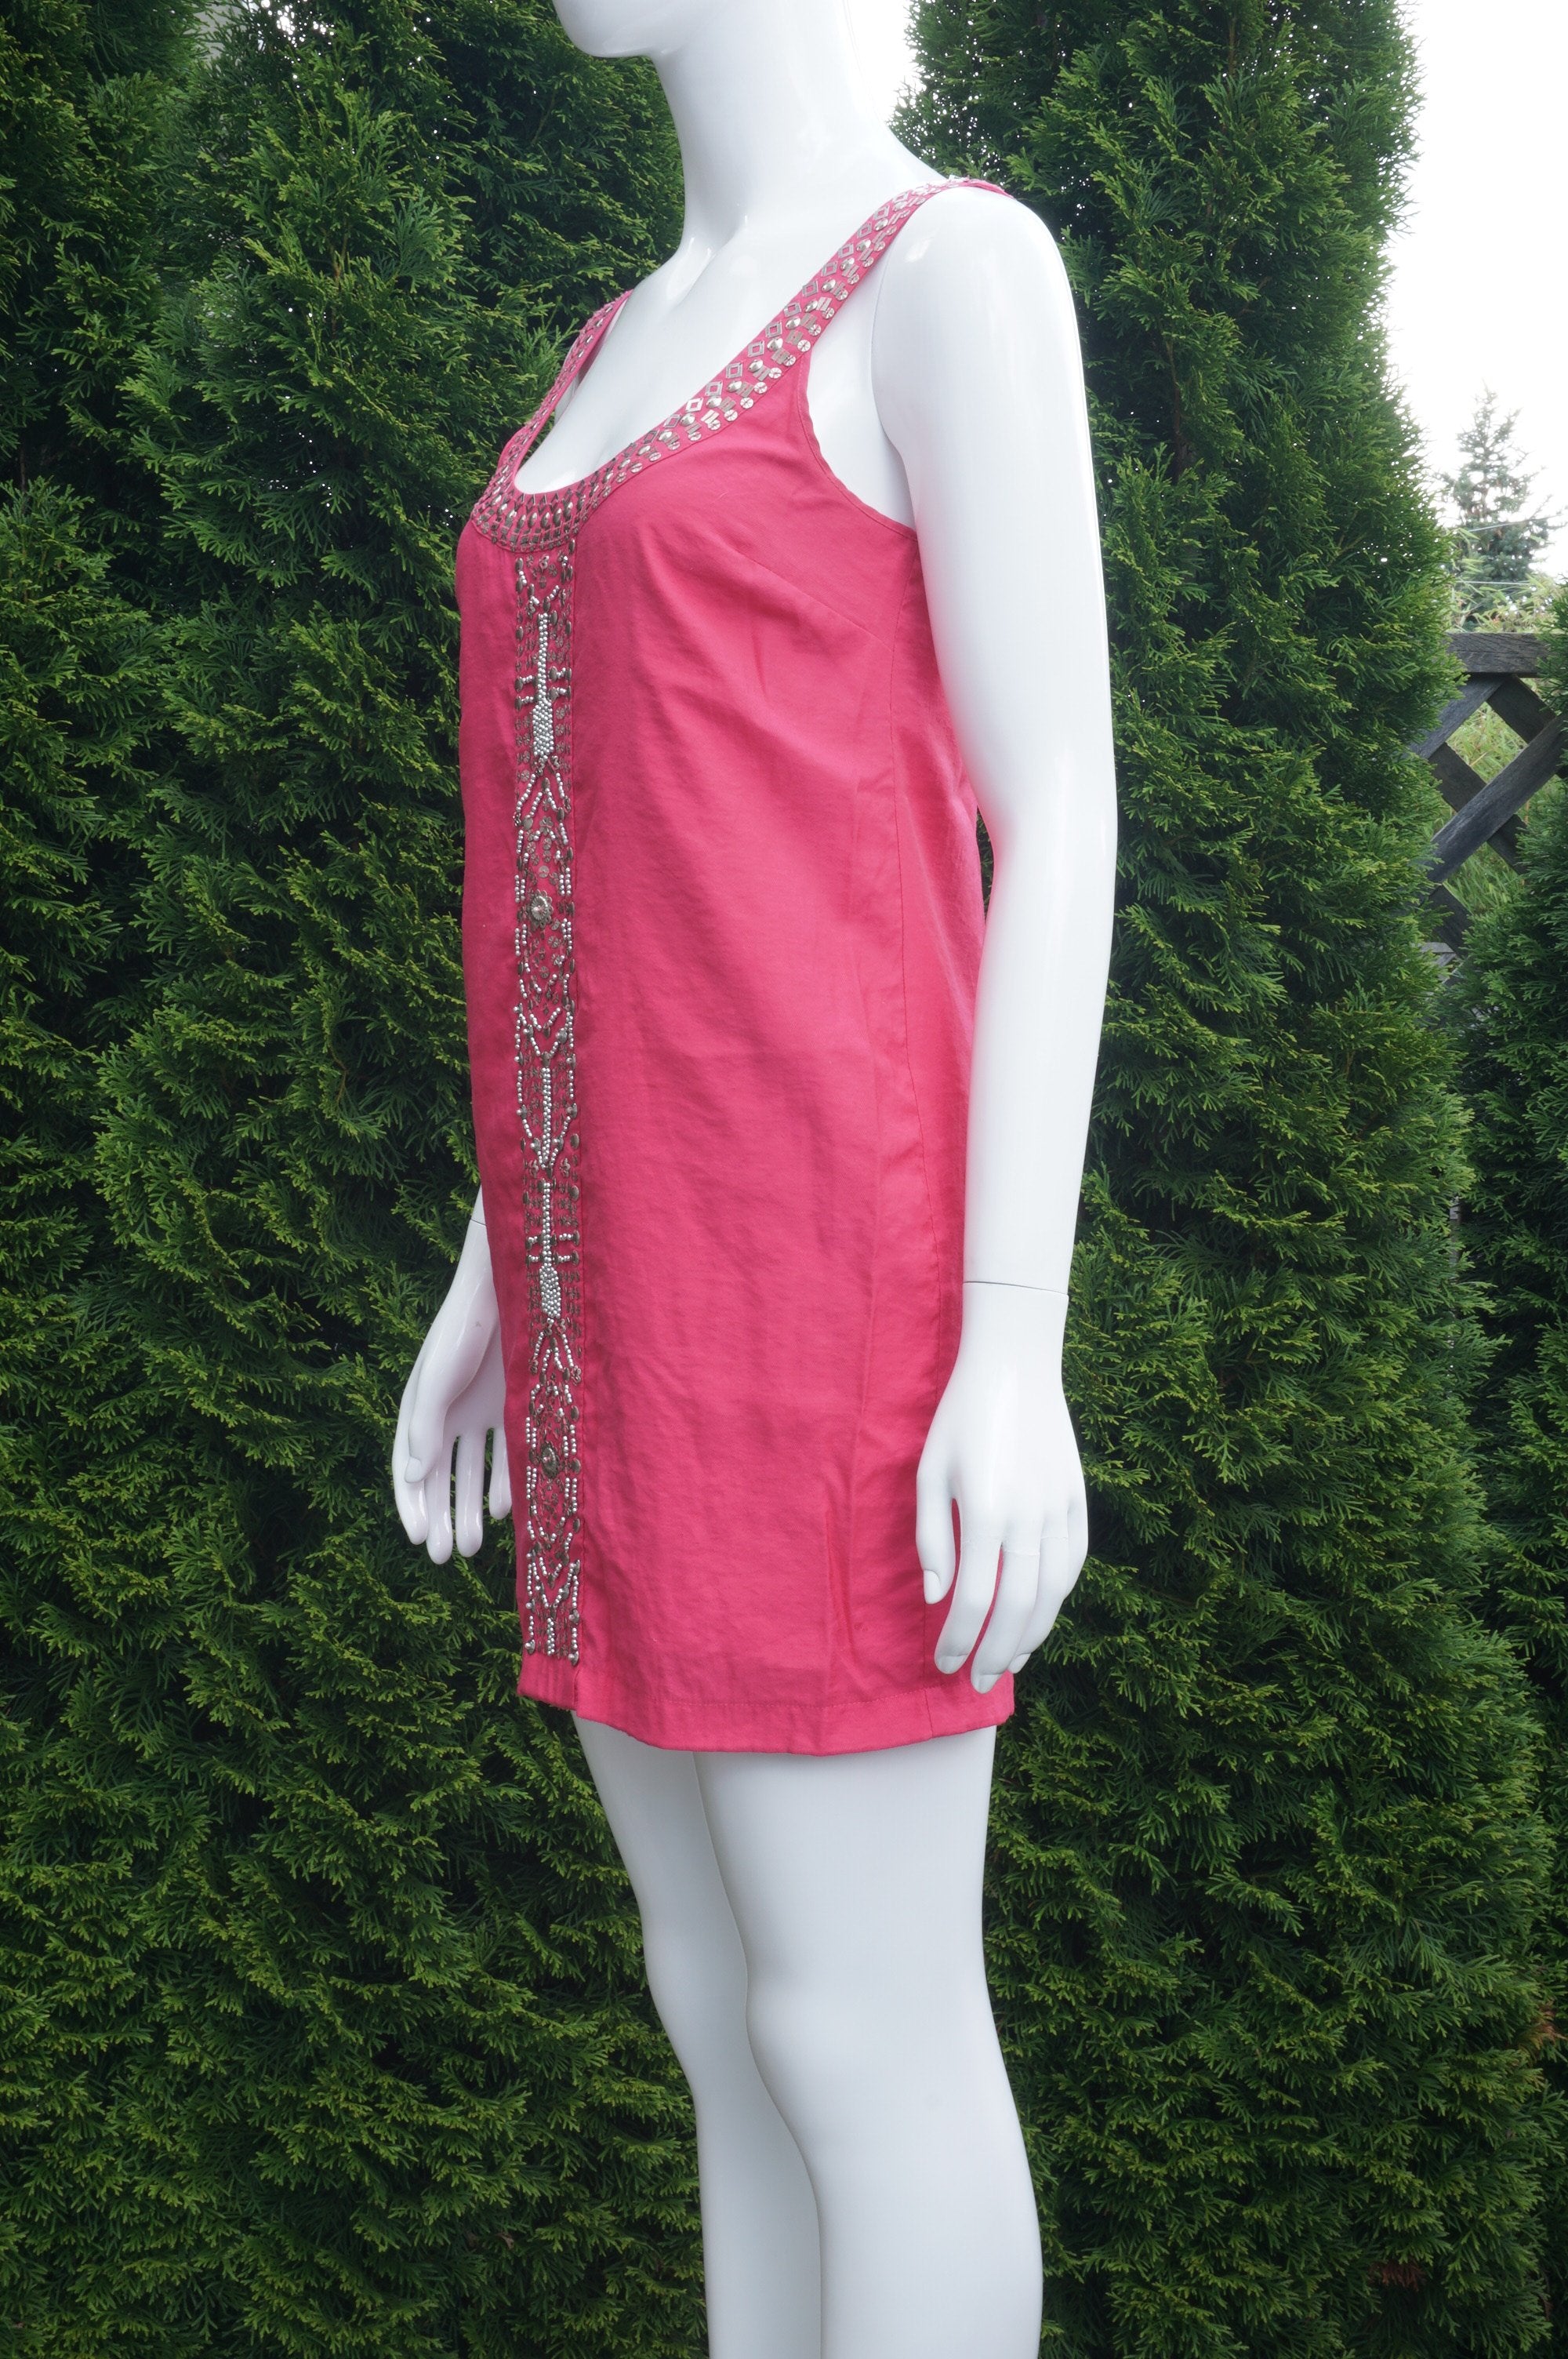 Bebe Pink Sleeveless Shift Dress With Embroidery, Bust 33 inches, length 32 inches. Lined., Pink, Body: 95% Rayon, 5% nylon. Lining: 100% Polyester, women's Dresses & Rompers, women's Pink Dresses & Rompers, Bebe women's Dresses & Rompers, tunic dress, sleeveless dress, pink dress, embroidery